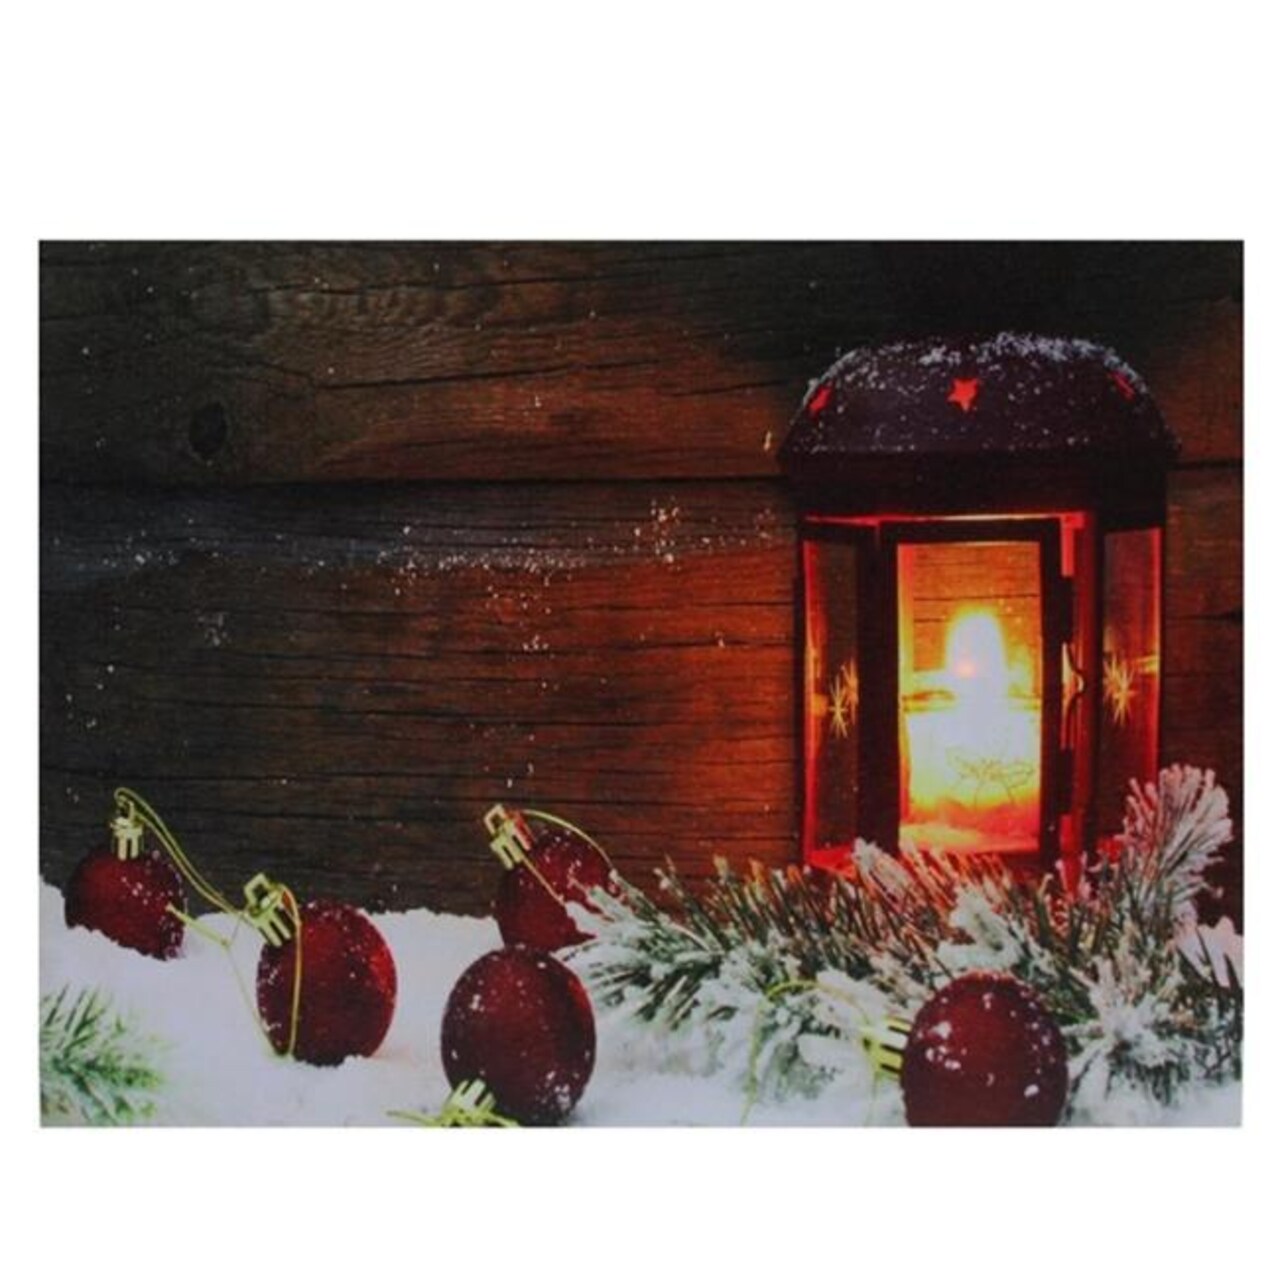 Northlight 32277513 LED Lighted Candle Lantern in the Wintry Outdoors Christmas Canvas Wall Art - 12 x 15.75 in.